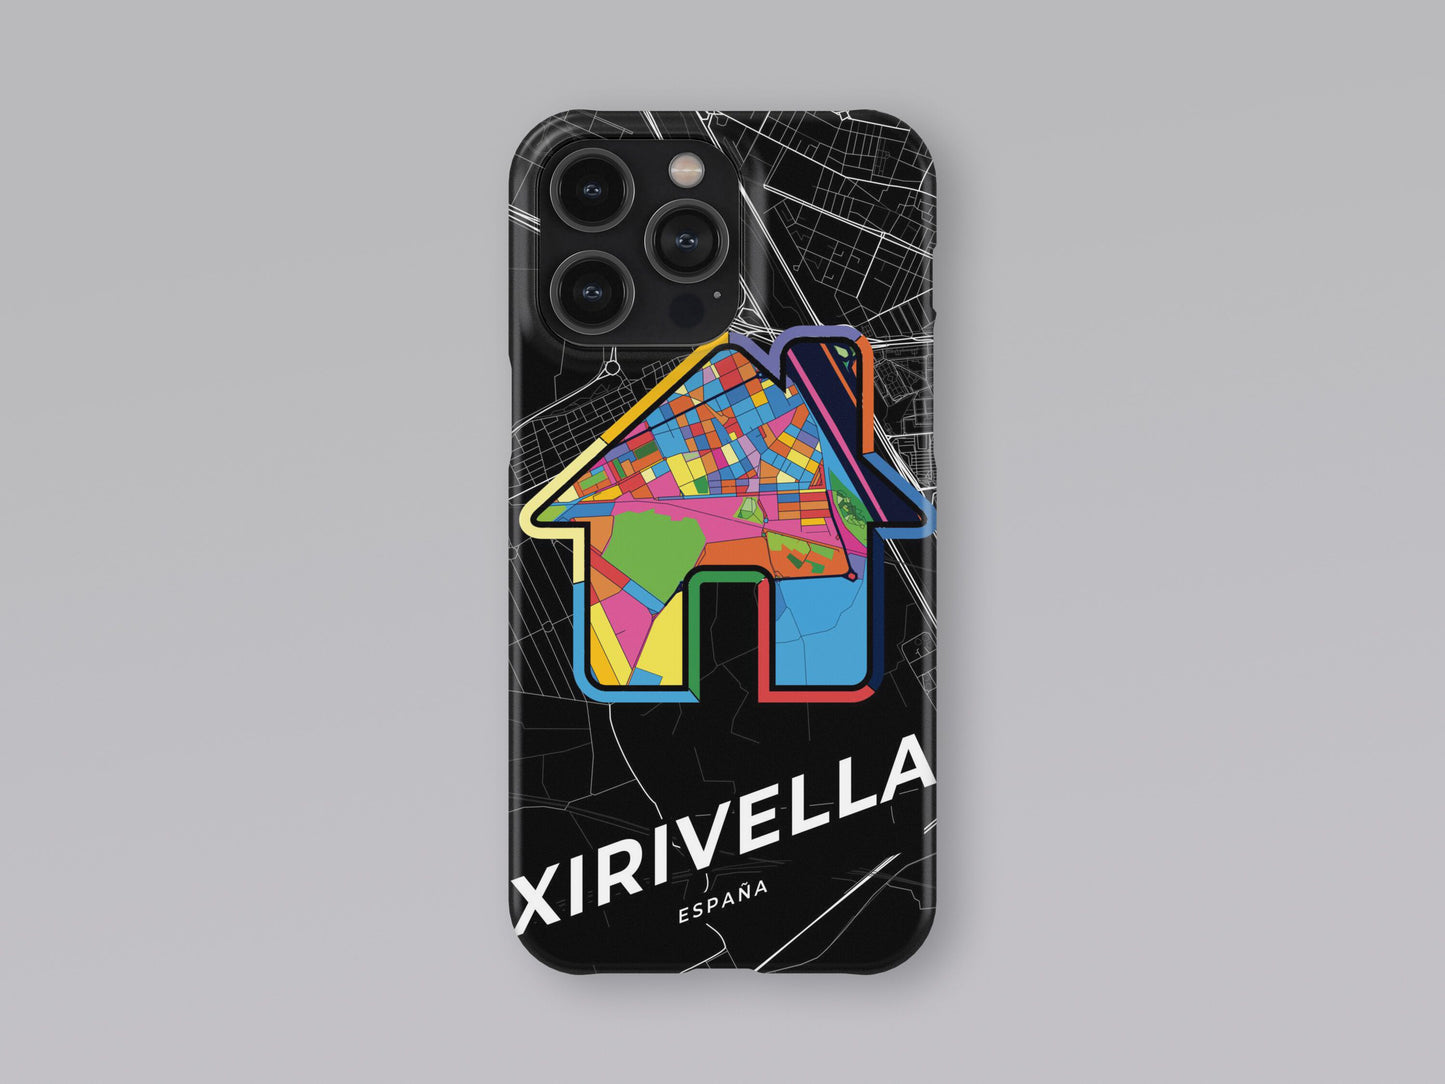 Xirivella Spain slim phone case with colorful icon 3